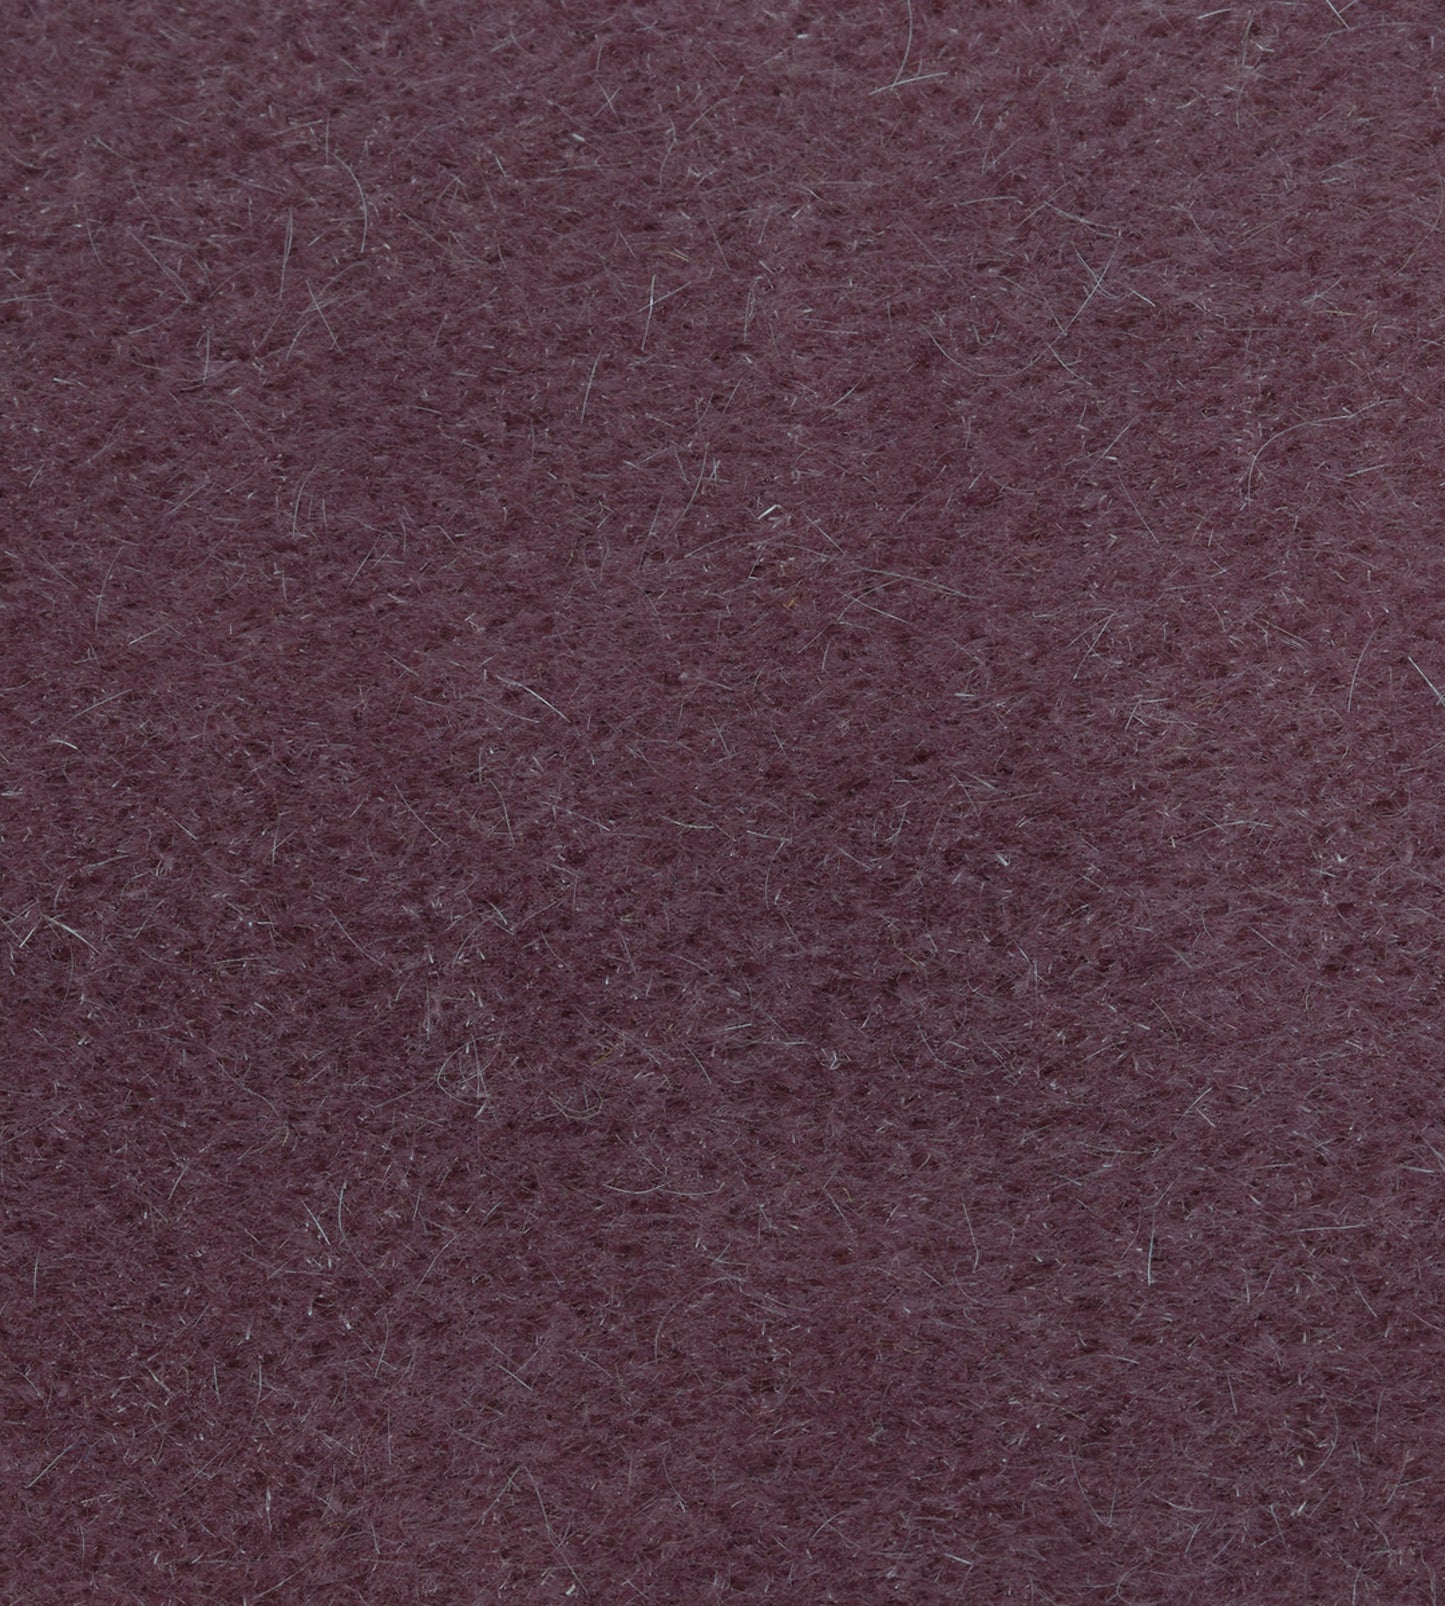 Purchase Old World Weavers Fabric Product VP 0865MAJE, Majestic Mohair French Lilac 1